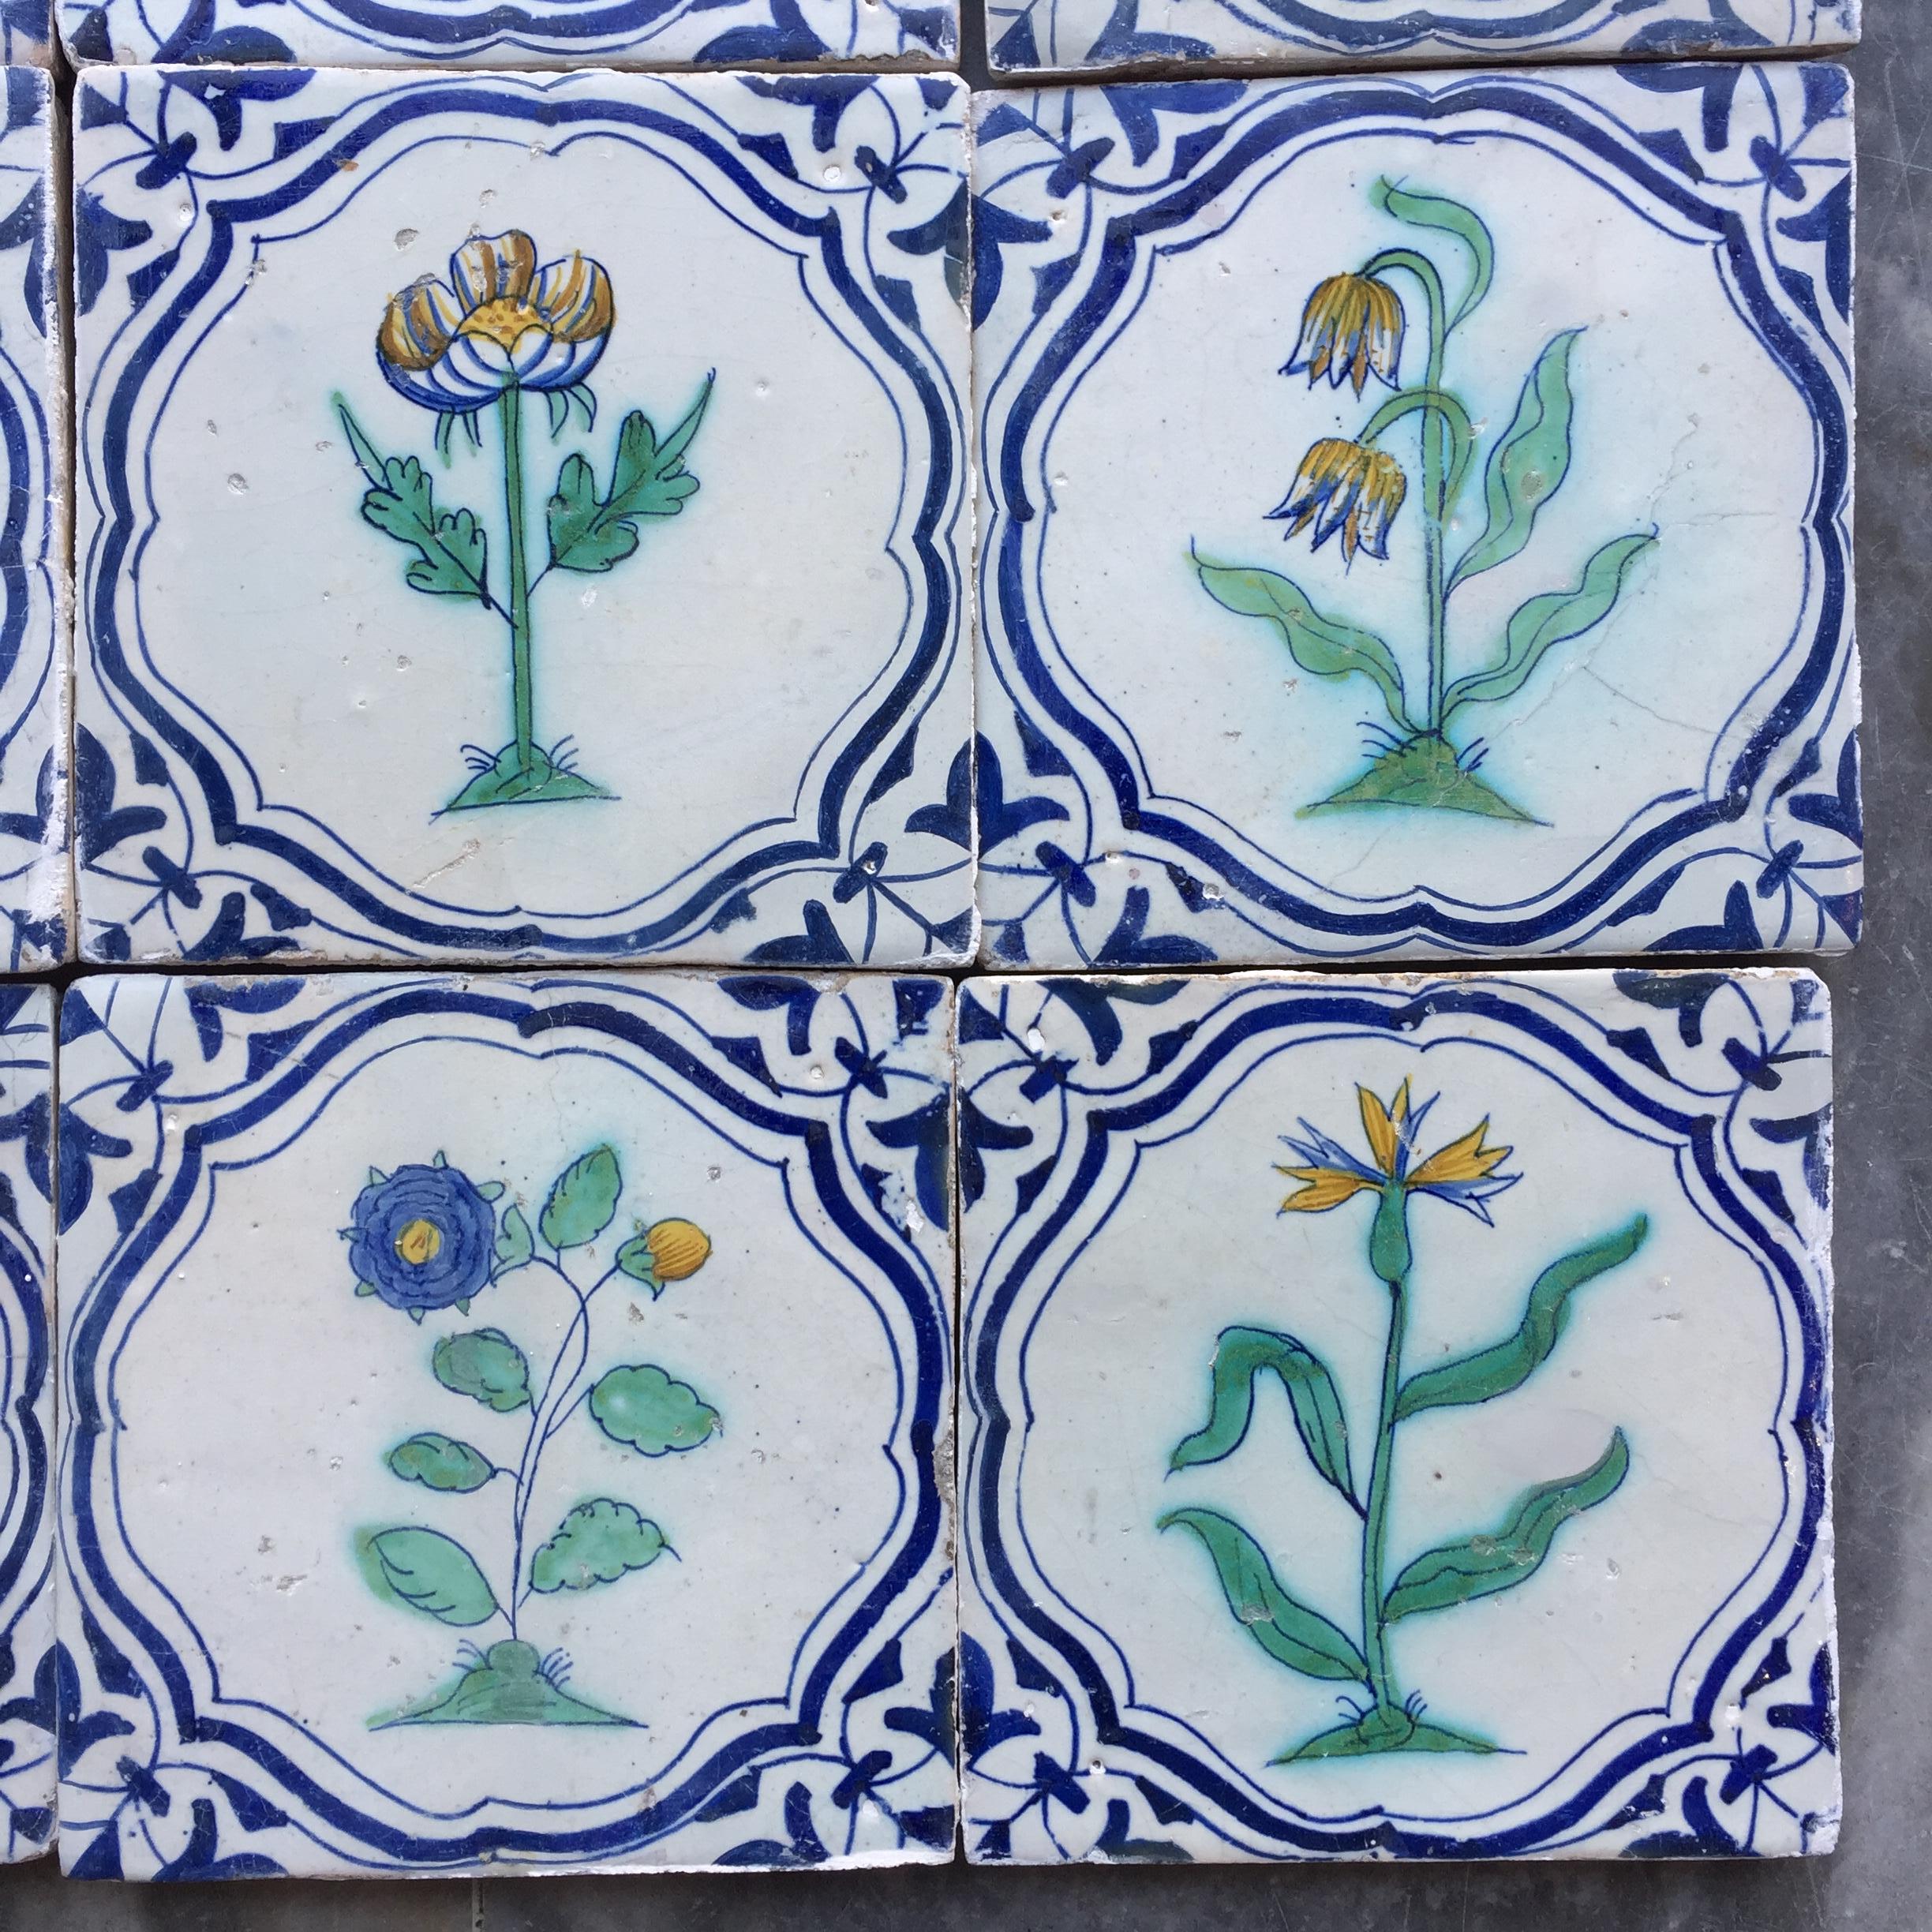 Important and Rare Set of Dutch Delft Tiles with Flowers, Early 17th Century 1